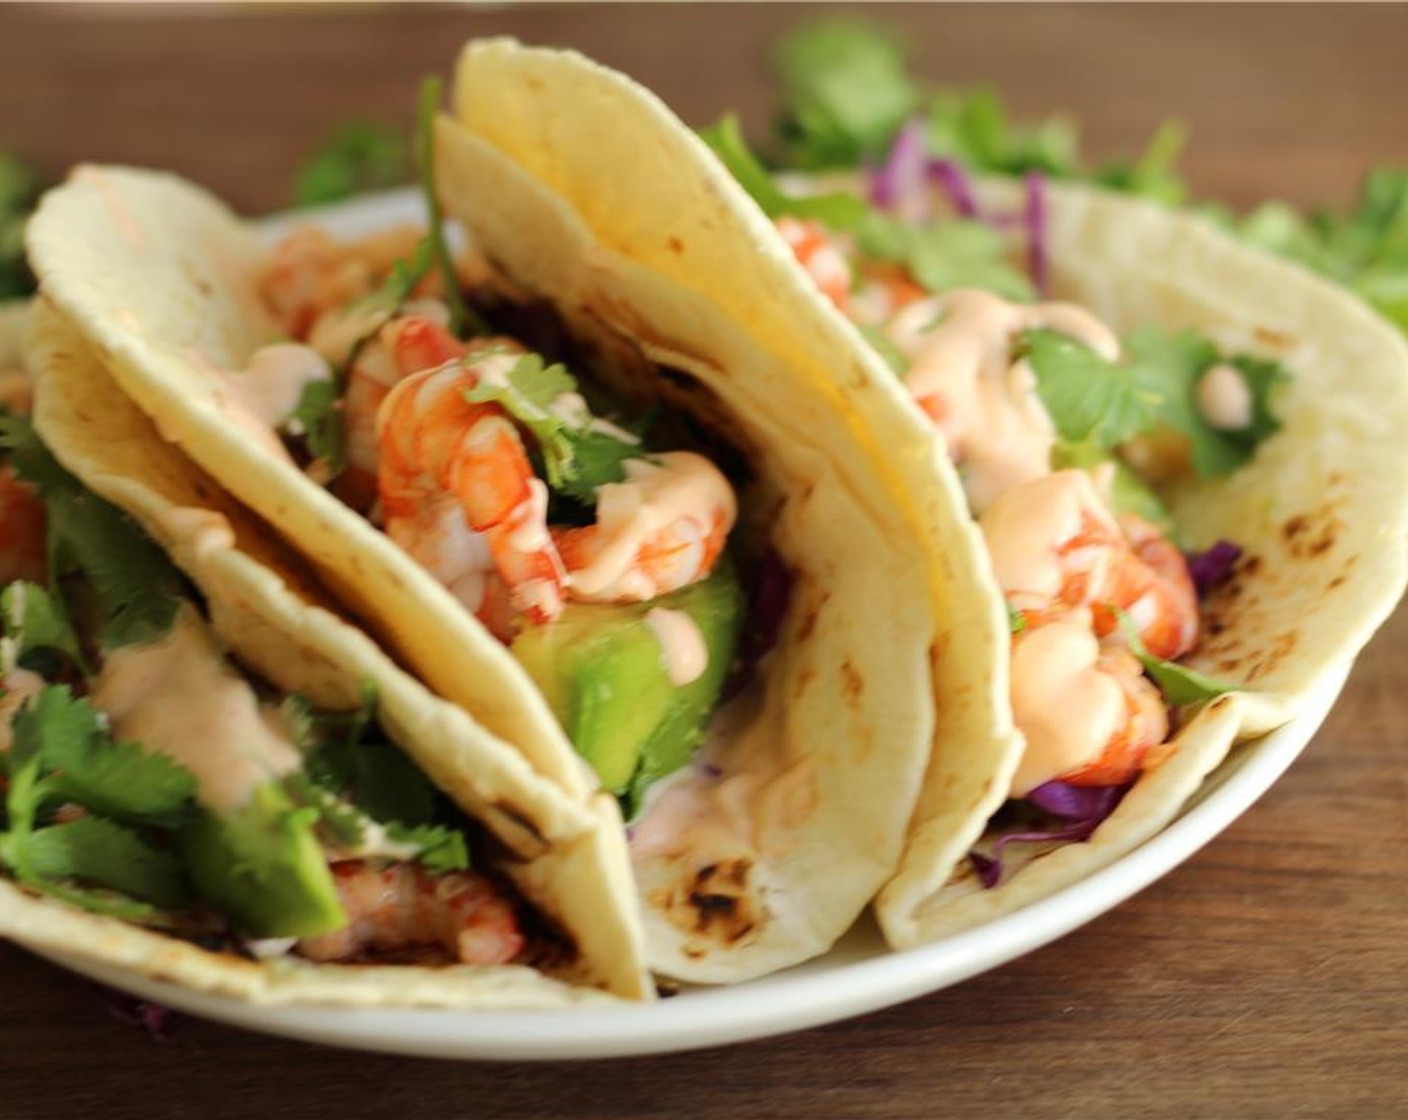 step 11 Assemble your taco by adding some shrimp, red cabbage, avocado and sauce. Enjoy!